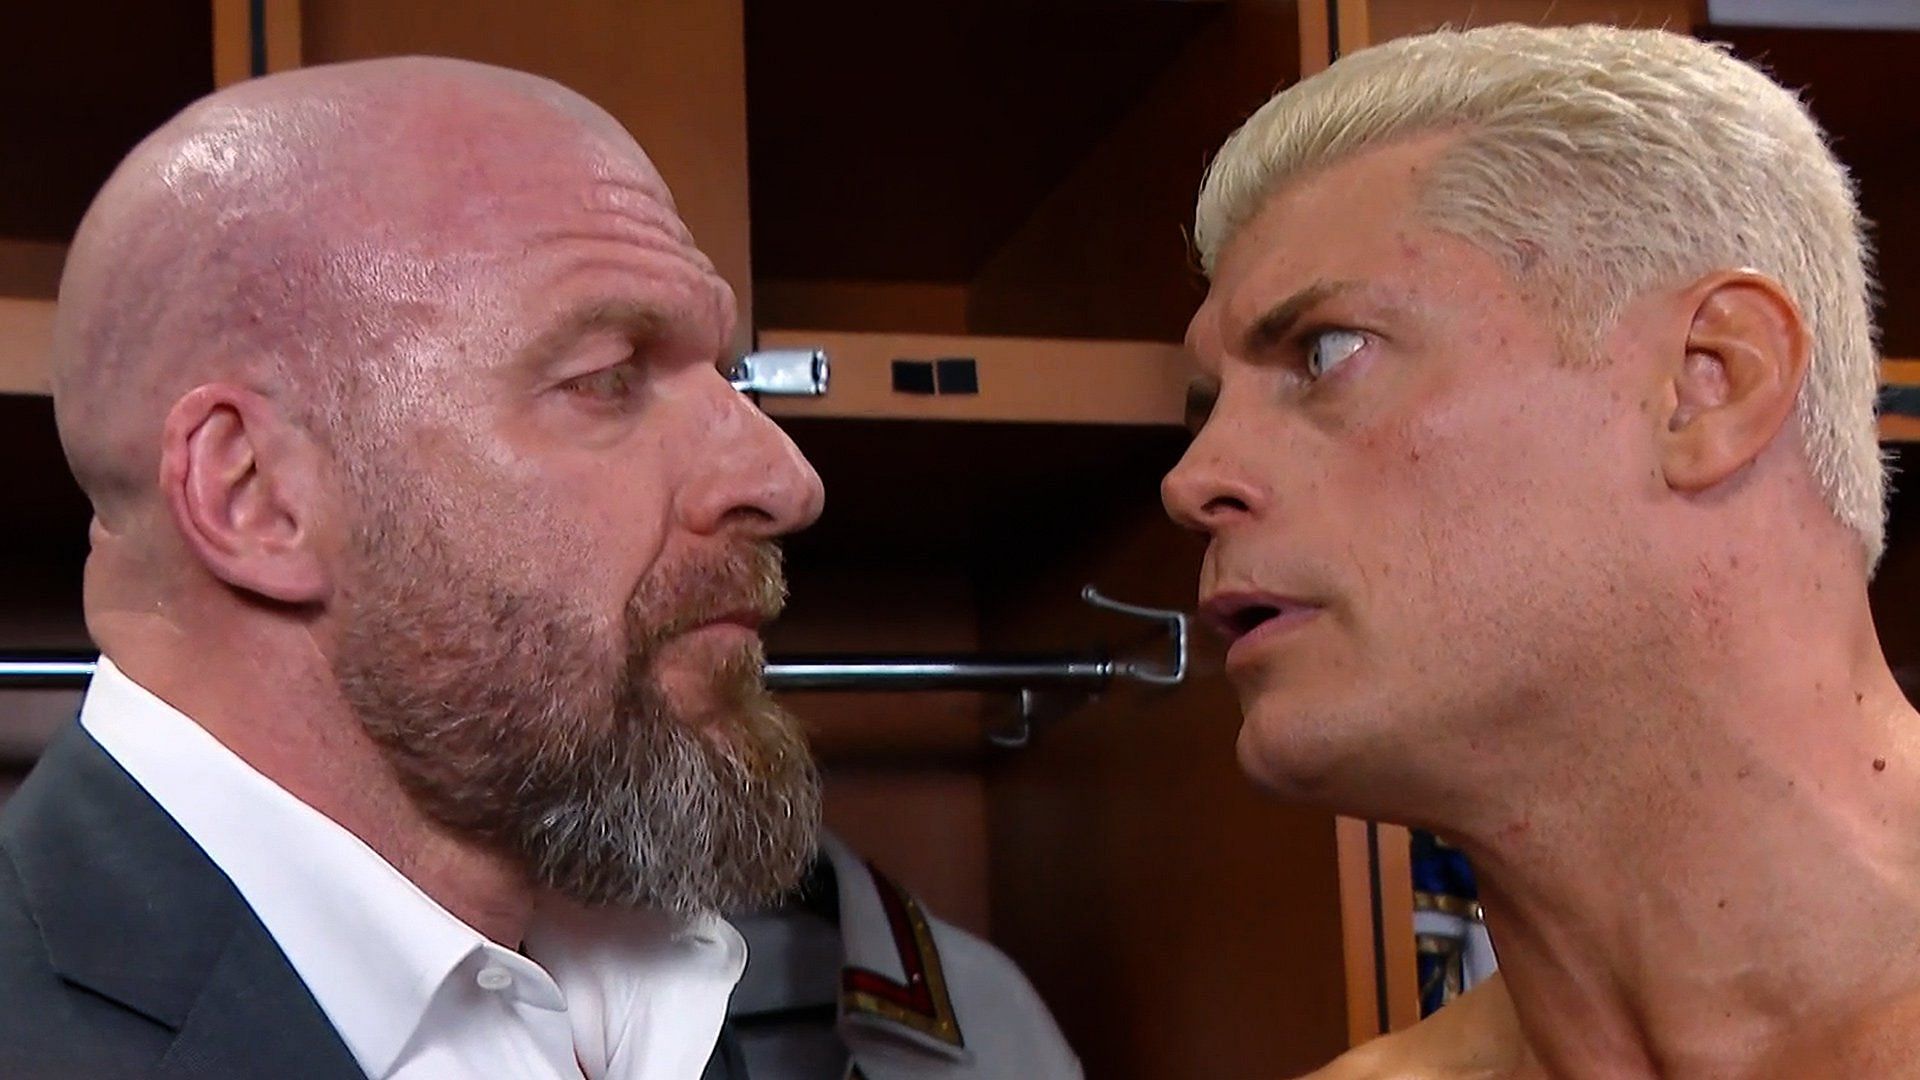 A WWE star shared what Cody Rhodes and Triple H have in common